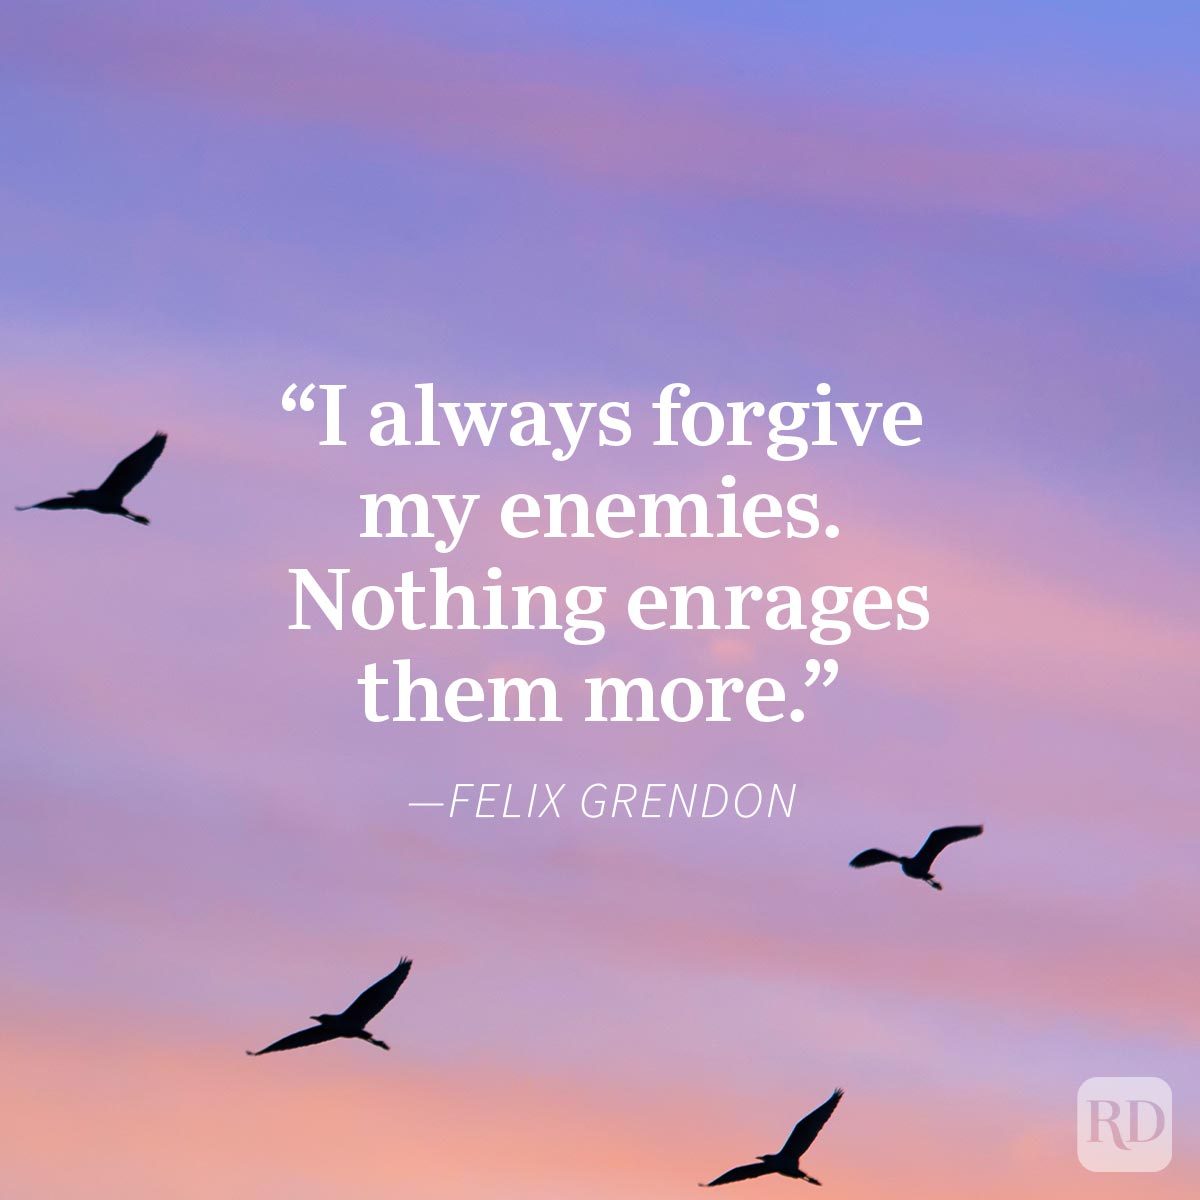 Quotes about forgiving your enemies on a peaceful sunset background with birds flying